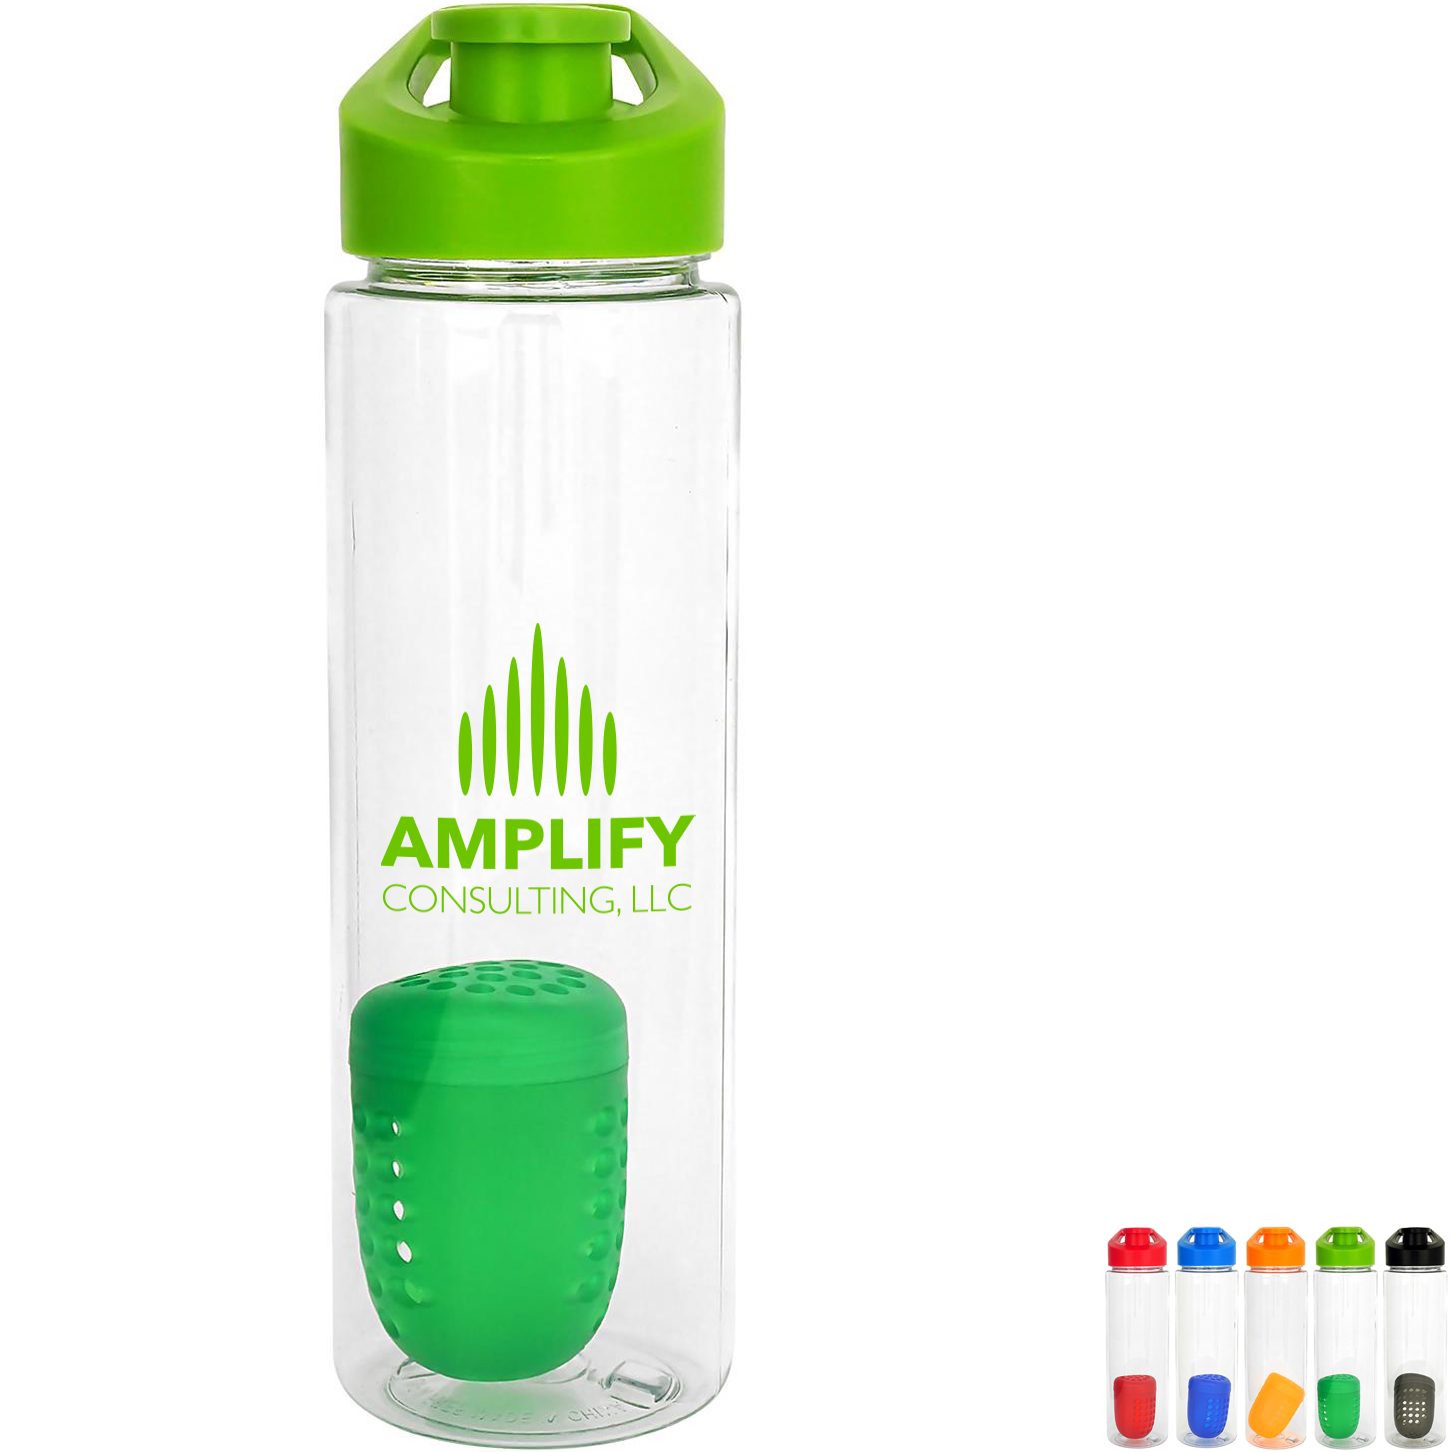 Clear Impact Halcyon Water Bottle with Straw Lid - 24 oz.